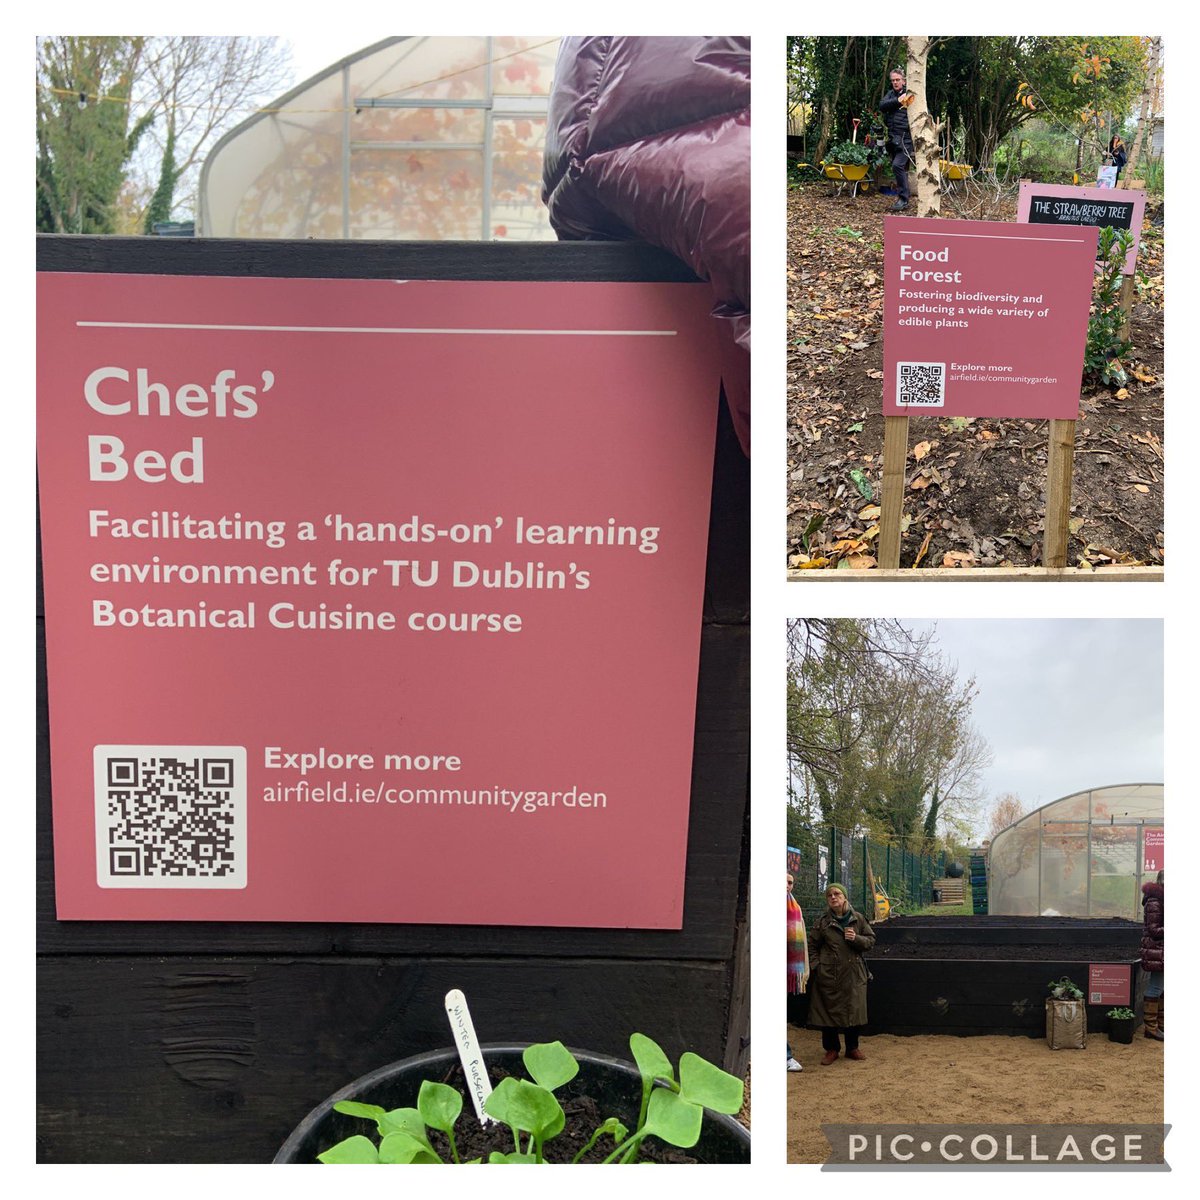 How cool is this👇our new outdoor classroom for our Botanical Cuisine chefs🙌 a great space for #appliedlearning #foodsustainability Congratulations @AirfieldEstate on the launch of your community garden @cathmartingreen @FoodOnTheEdge @mistereatgalway